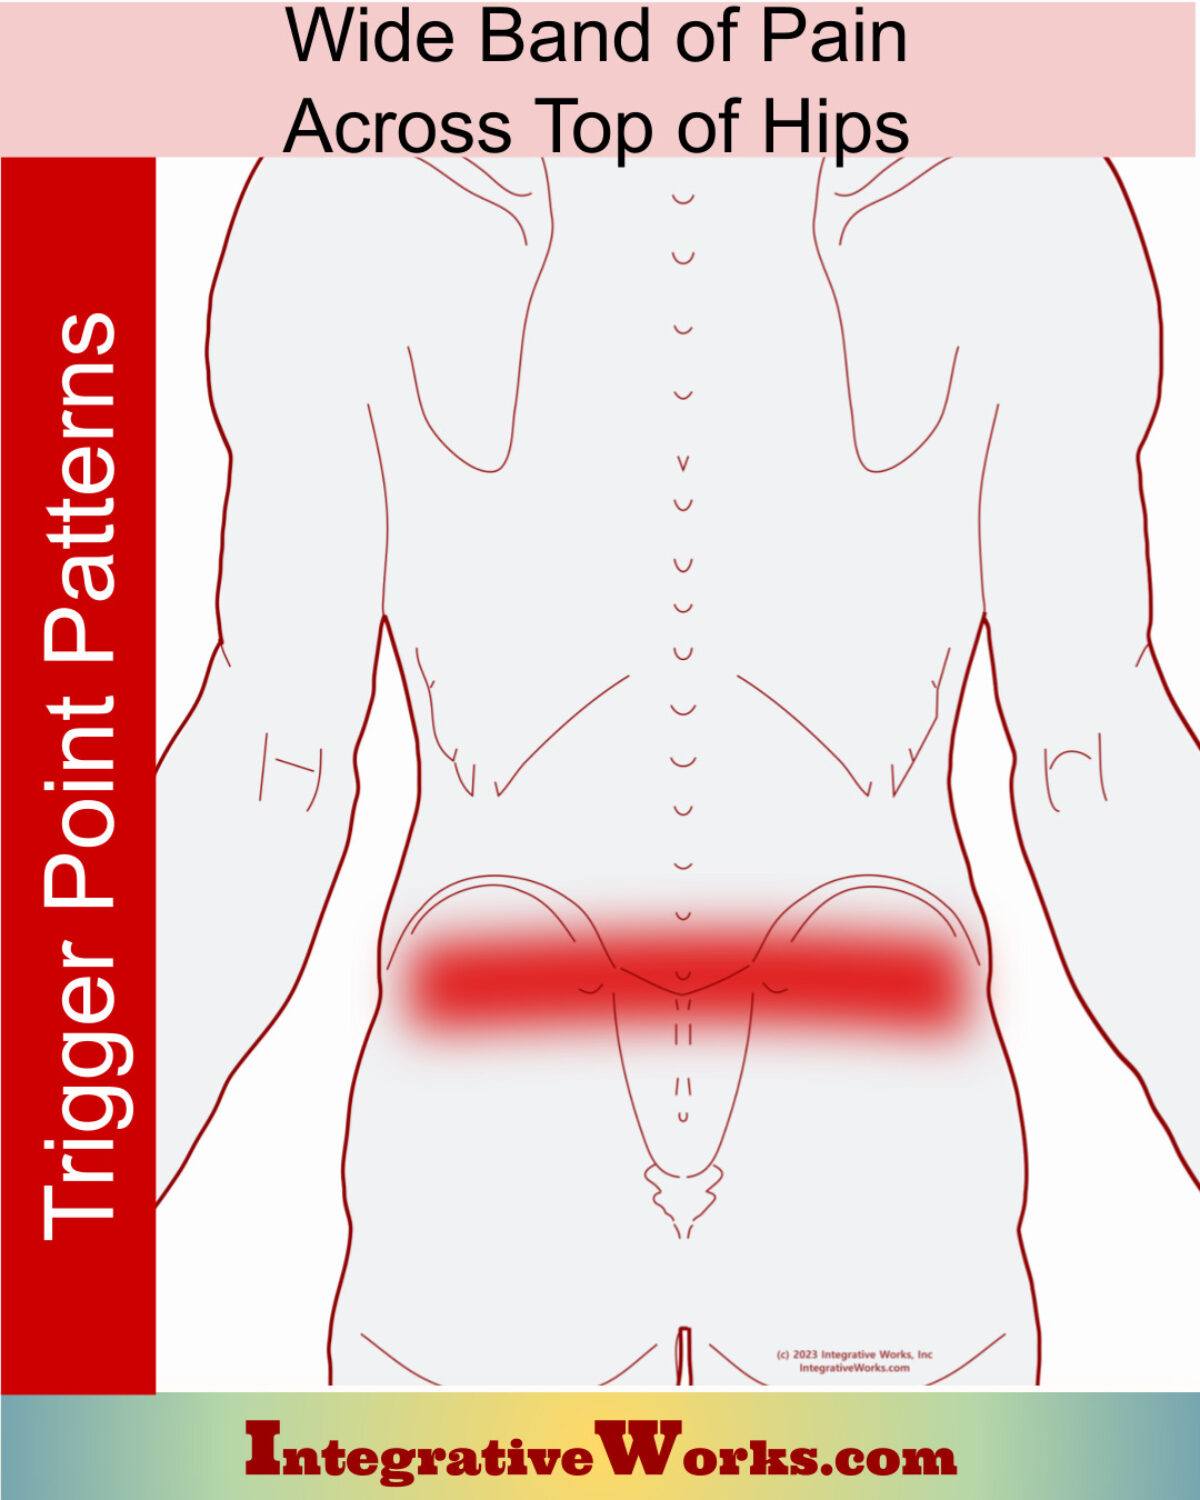 Wide Band of Pain Across the Top of the Hips - Integrative Works